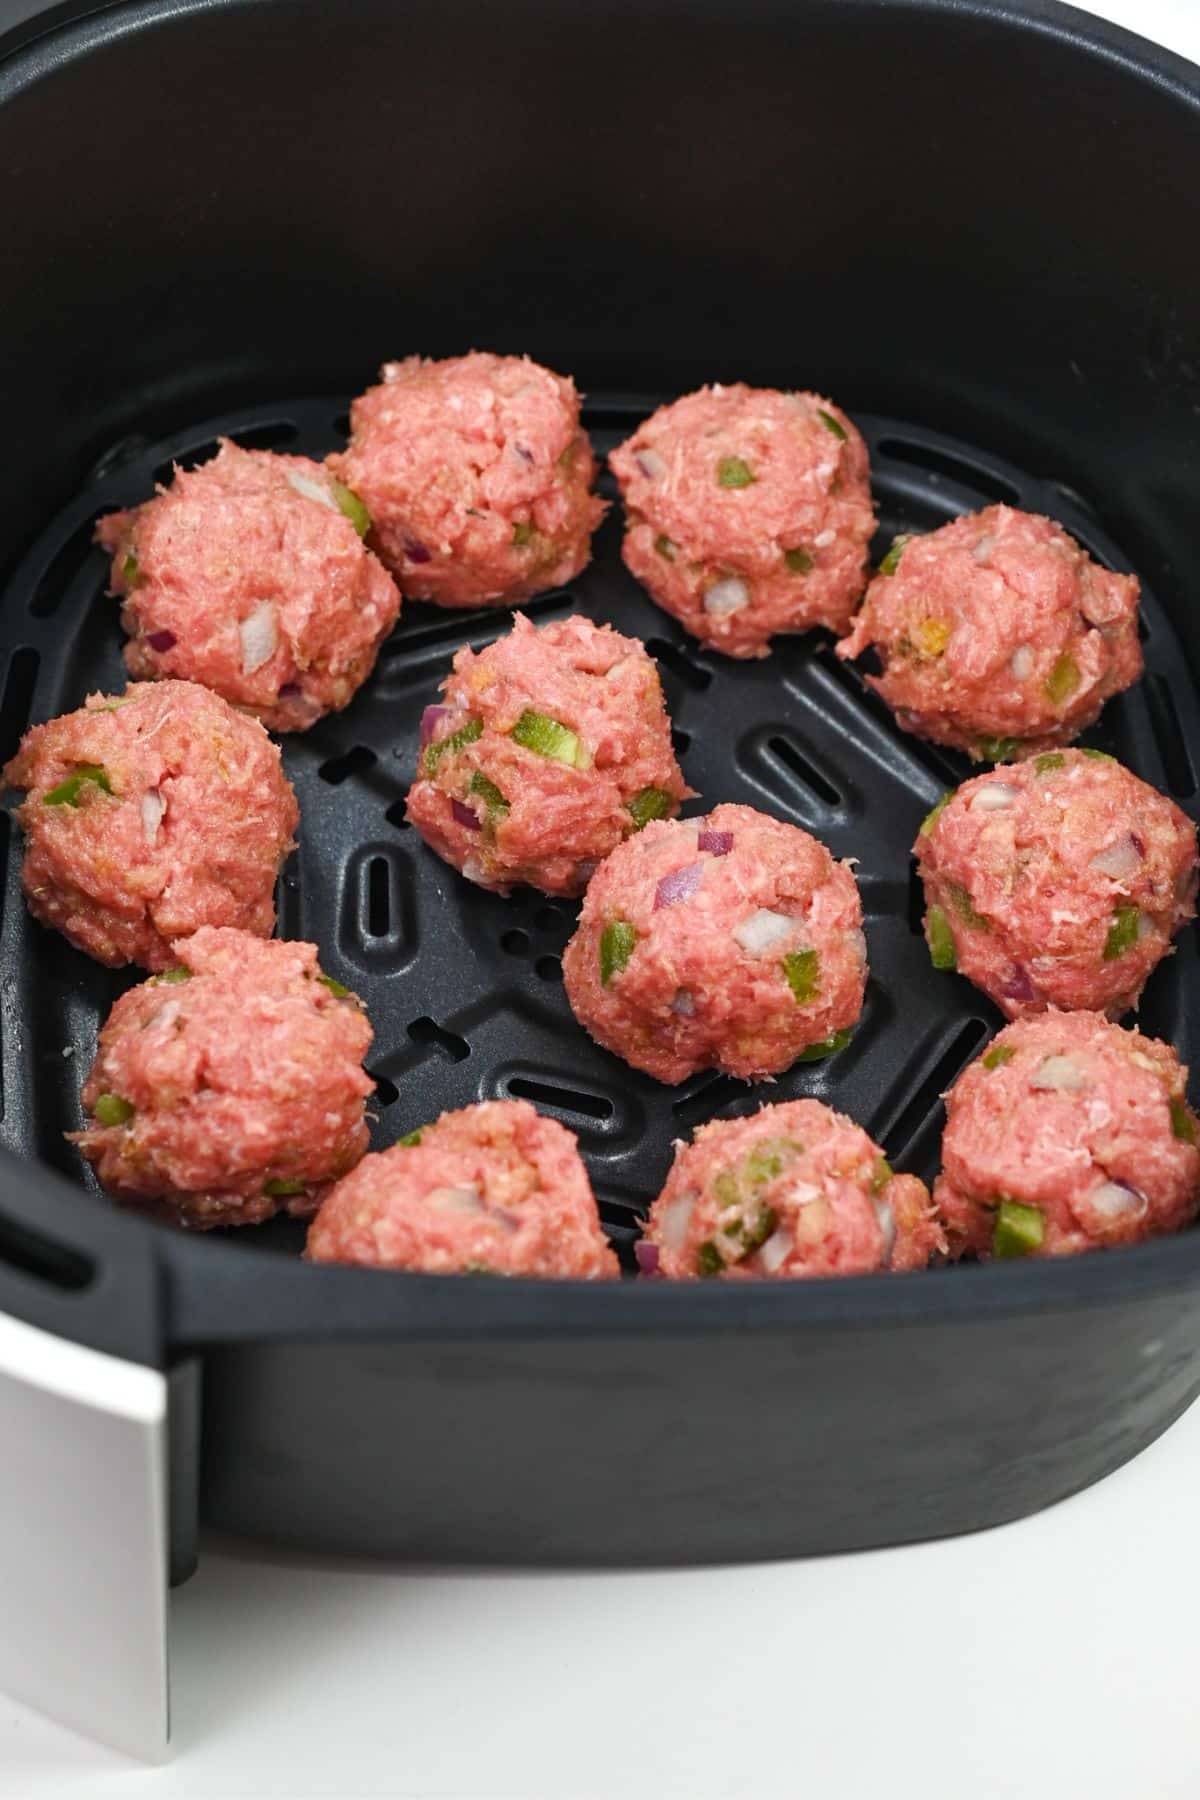 meatballed rolled into air fryer